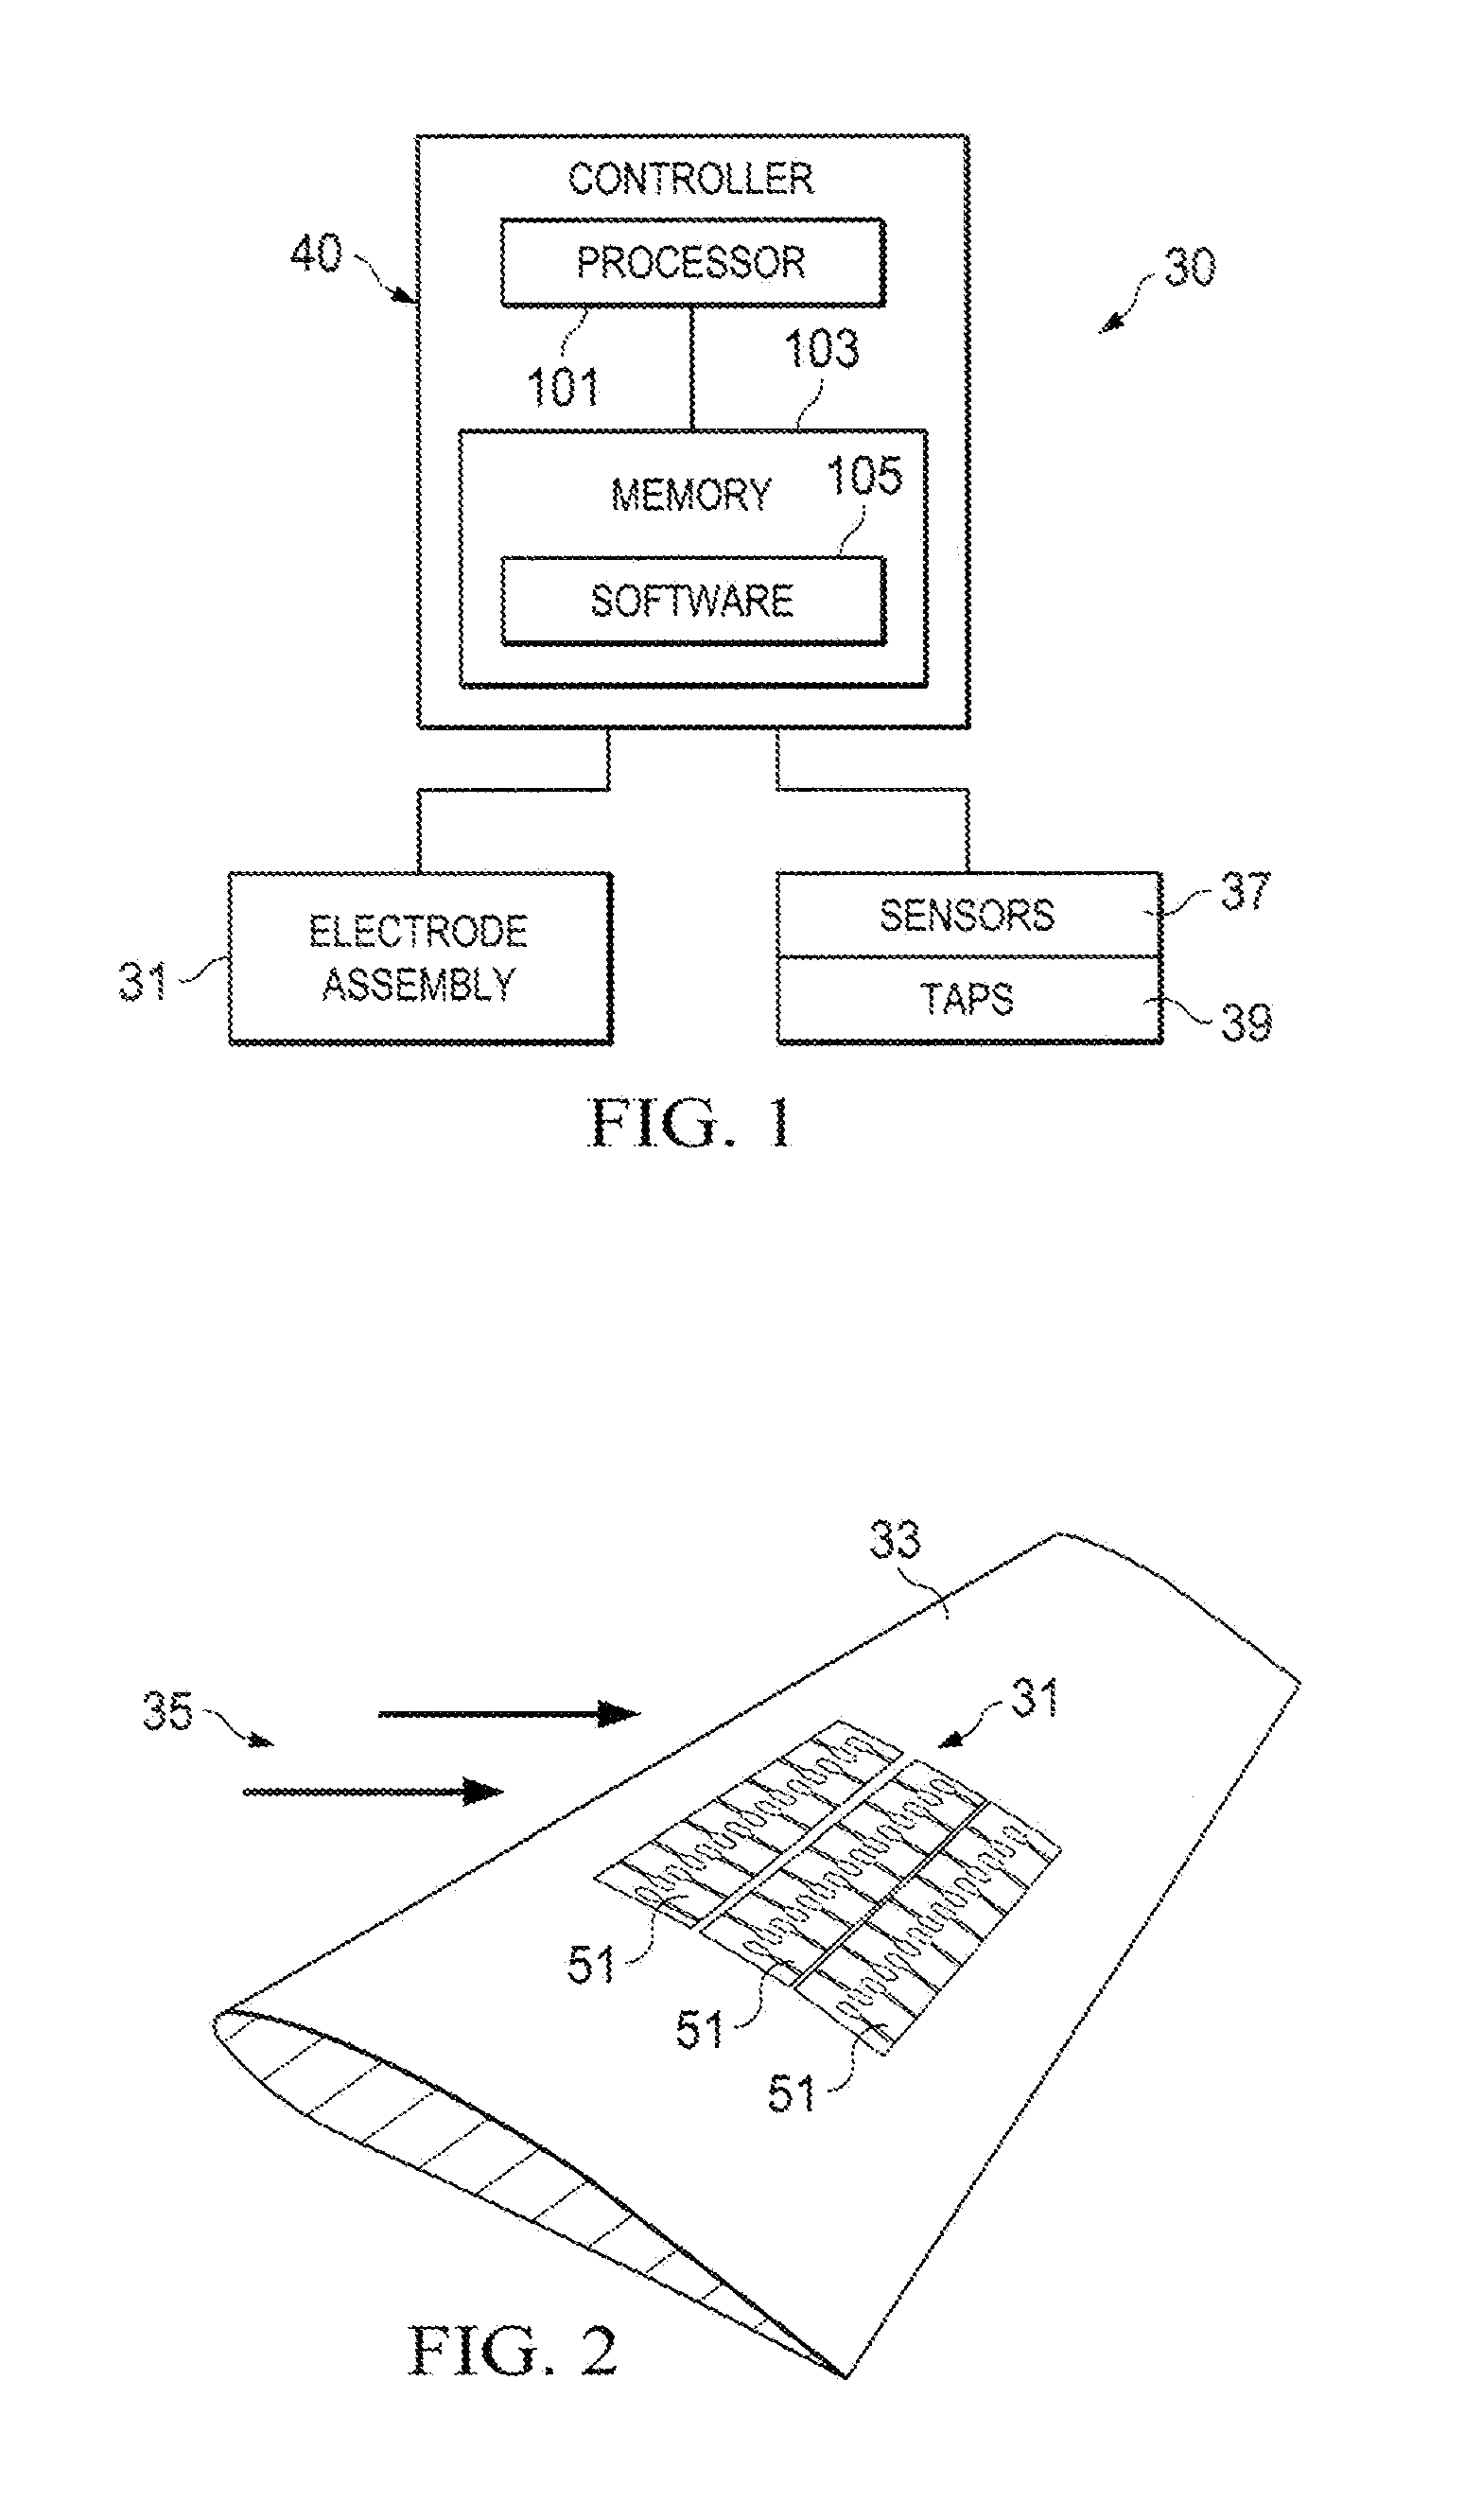 System, apparatus, program product, and related methods for providing boundary layer flow control